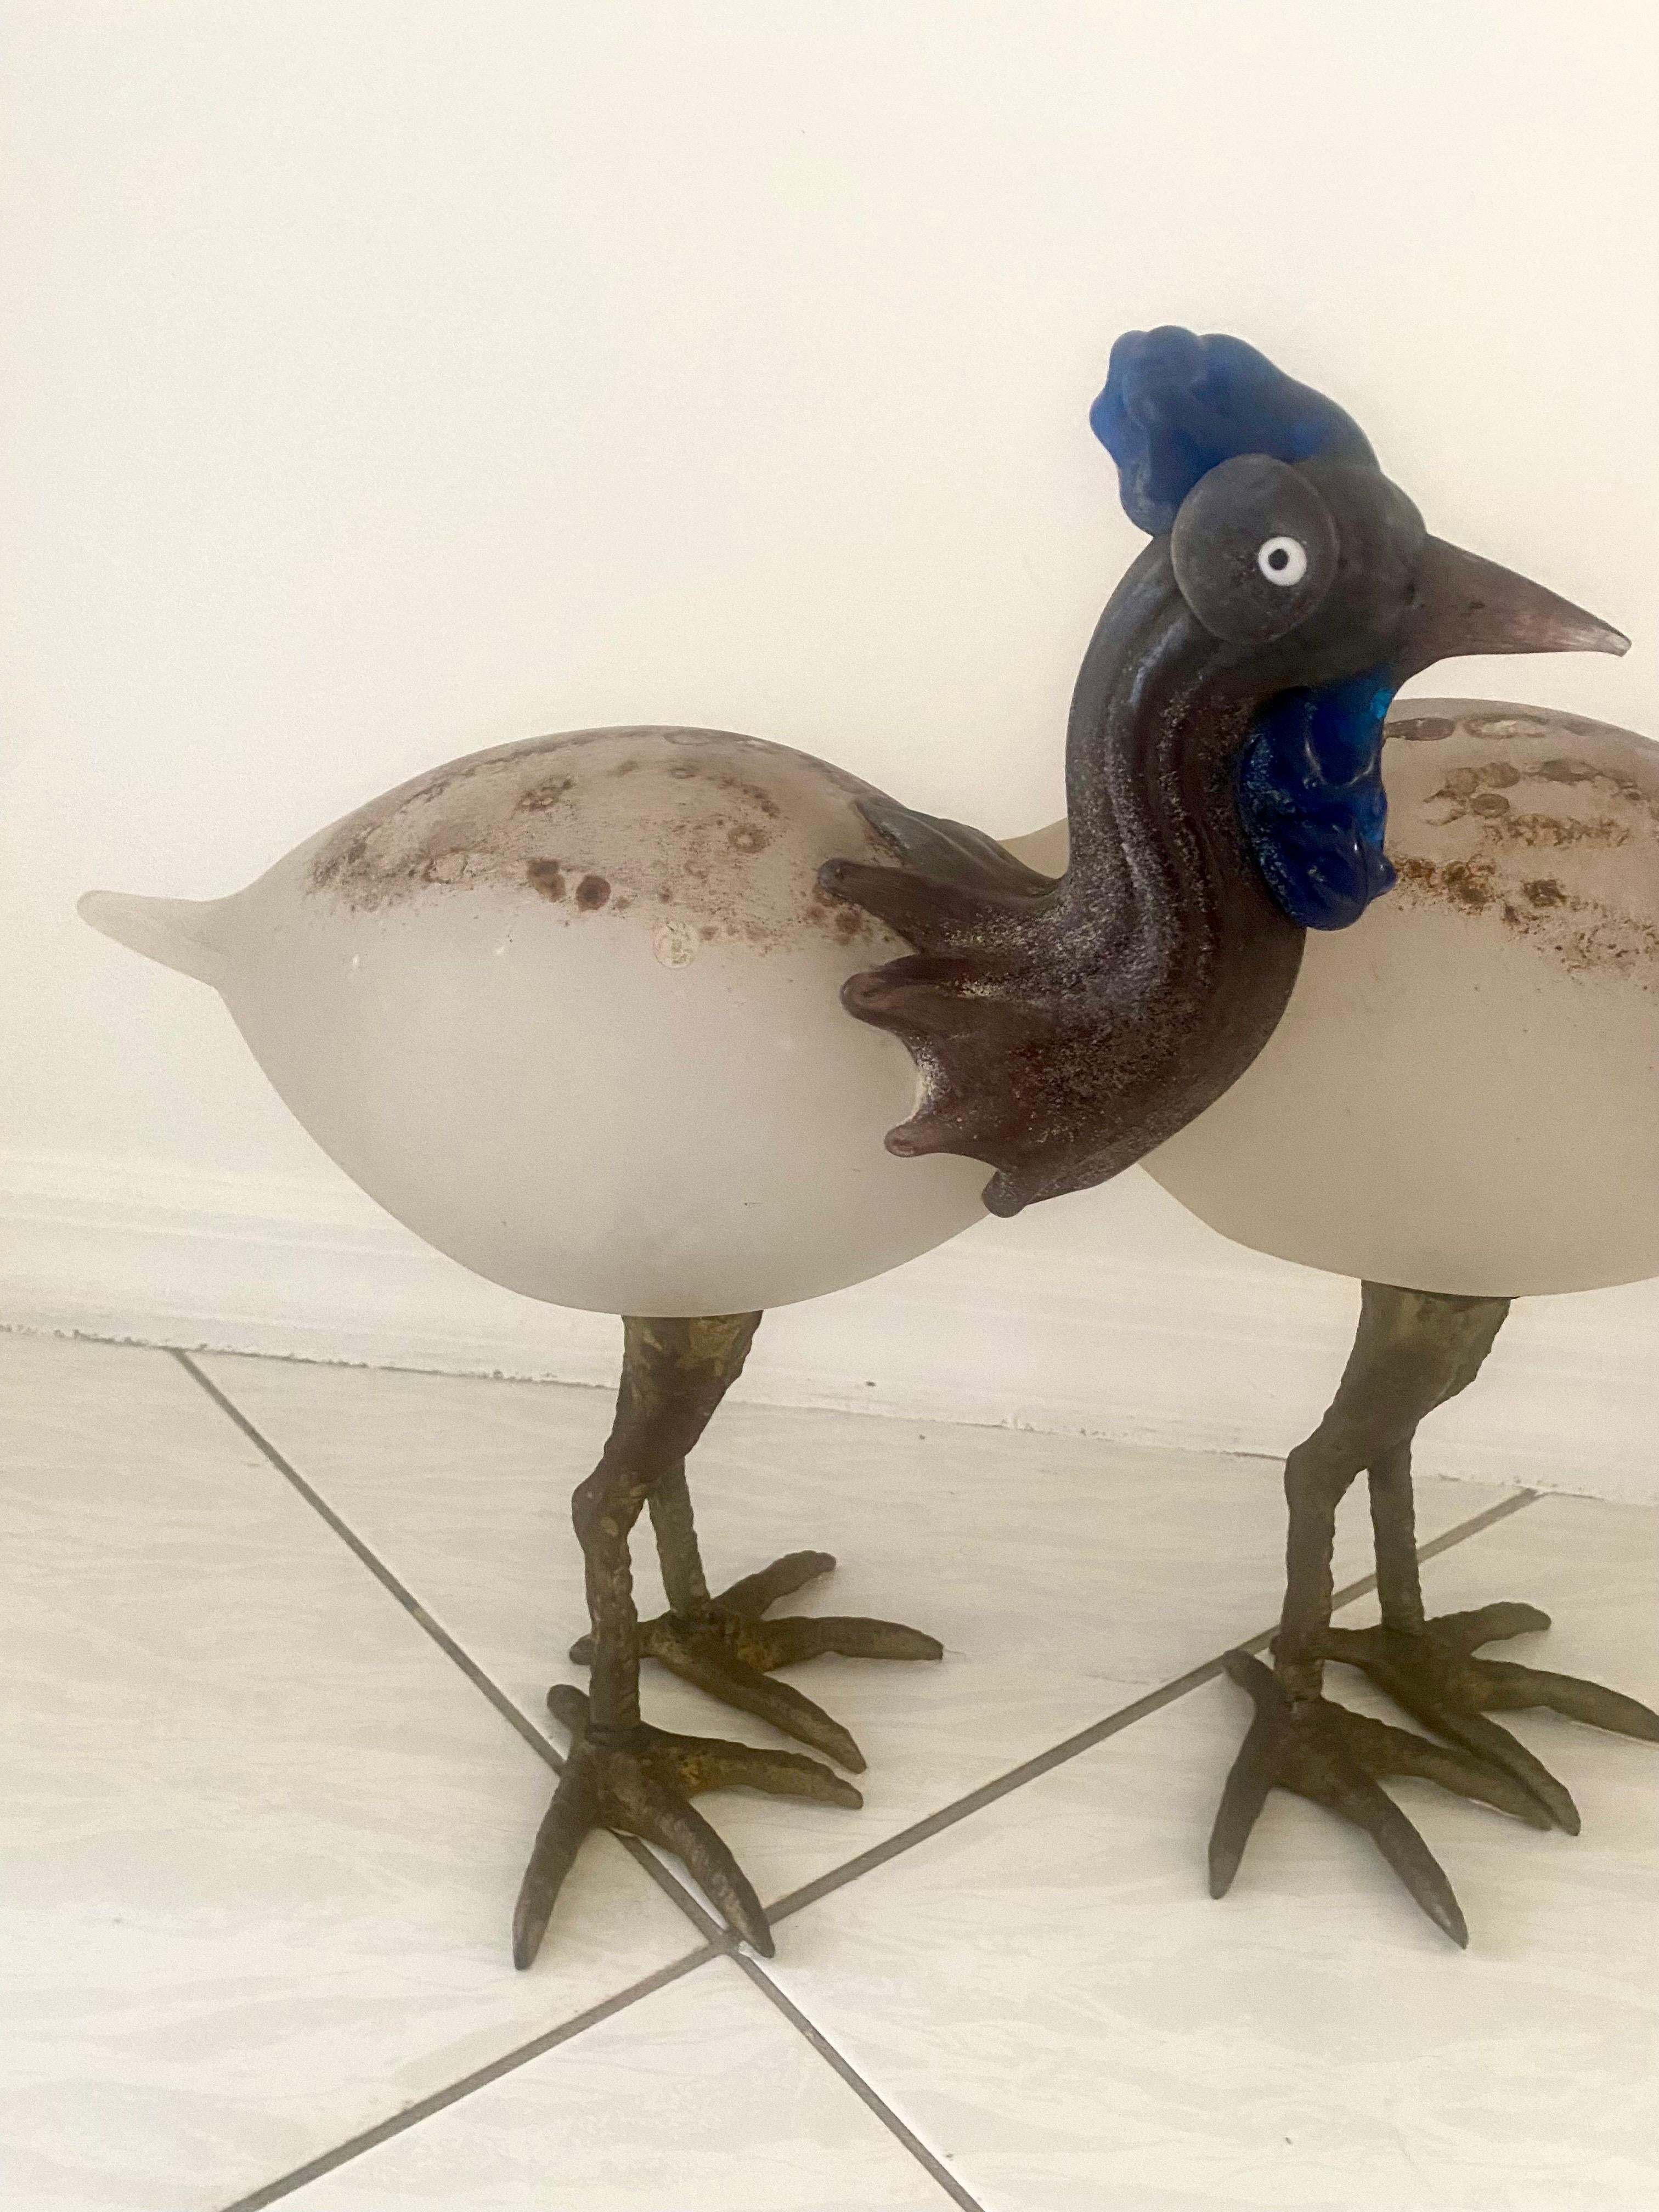 A rare pair of guinea hens in glass with the scavo technique. This technique was created by Alfredo Barbini and Cenedese in Italy, 1950s. The technique is a mixture of several powders dispersed on the glass service and then heated to 800 degrees